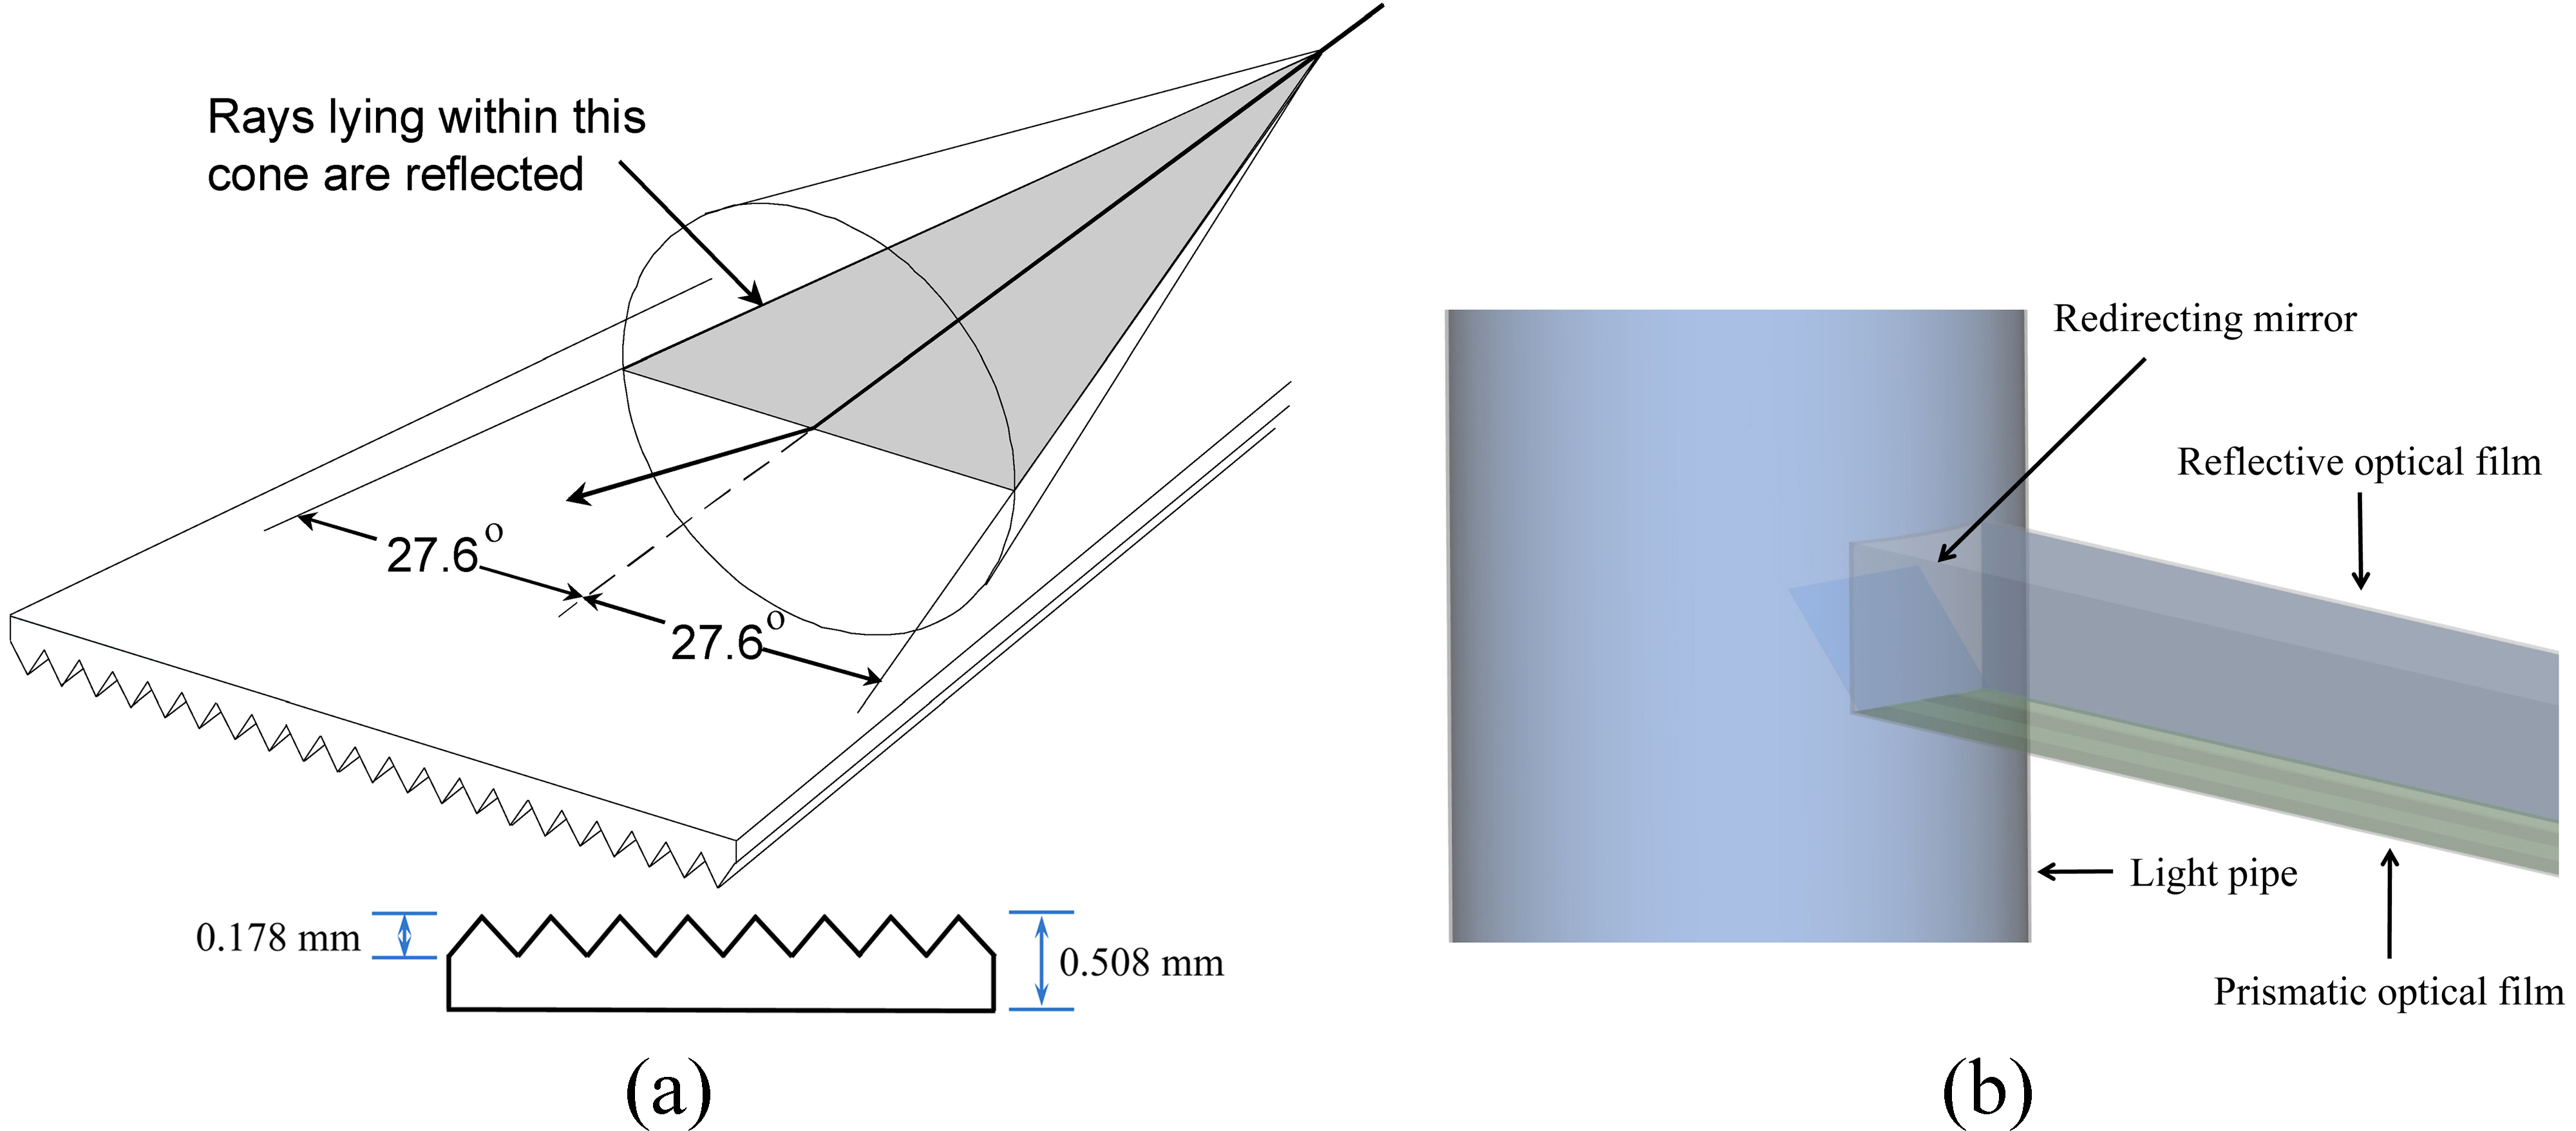 (a) Schematic detailing the geometry of the prismatic light film used in the light guide to transport and distribute the light [32-34] and (b) the redirecting mirror.